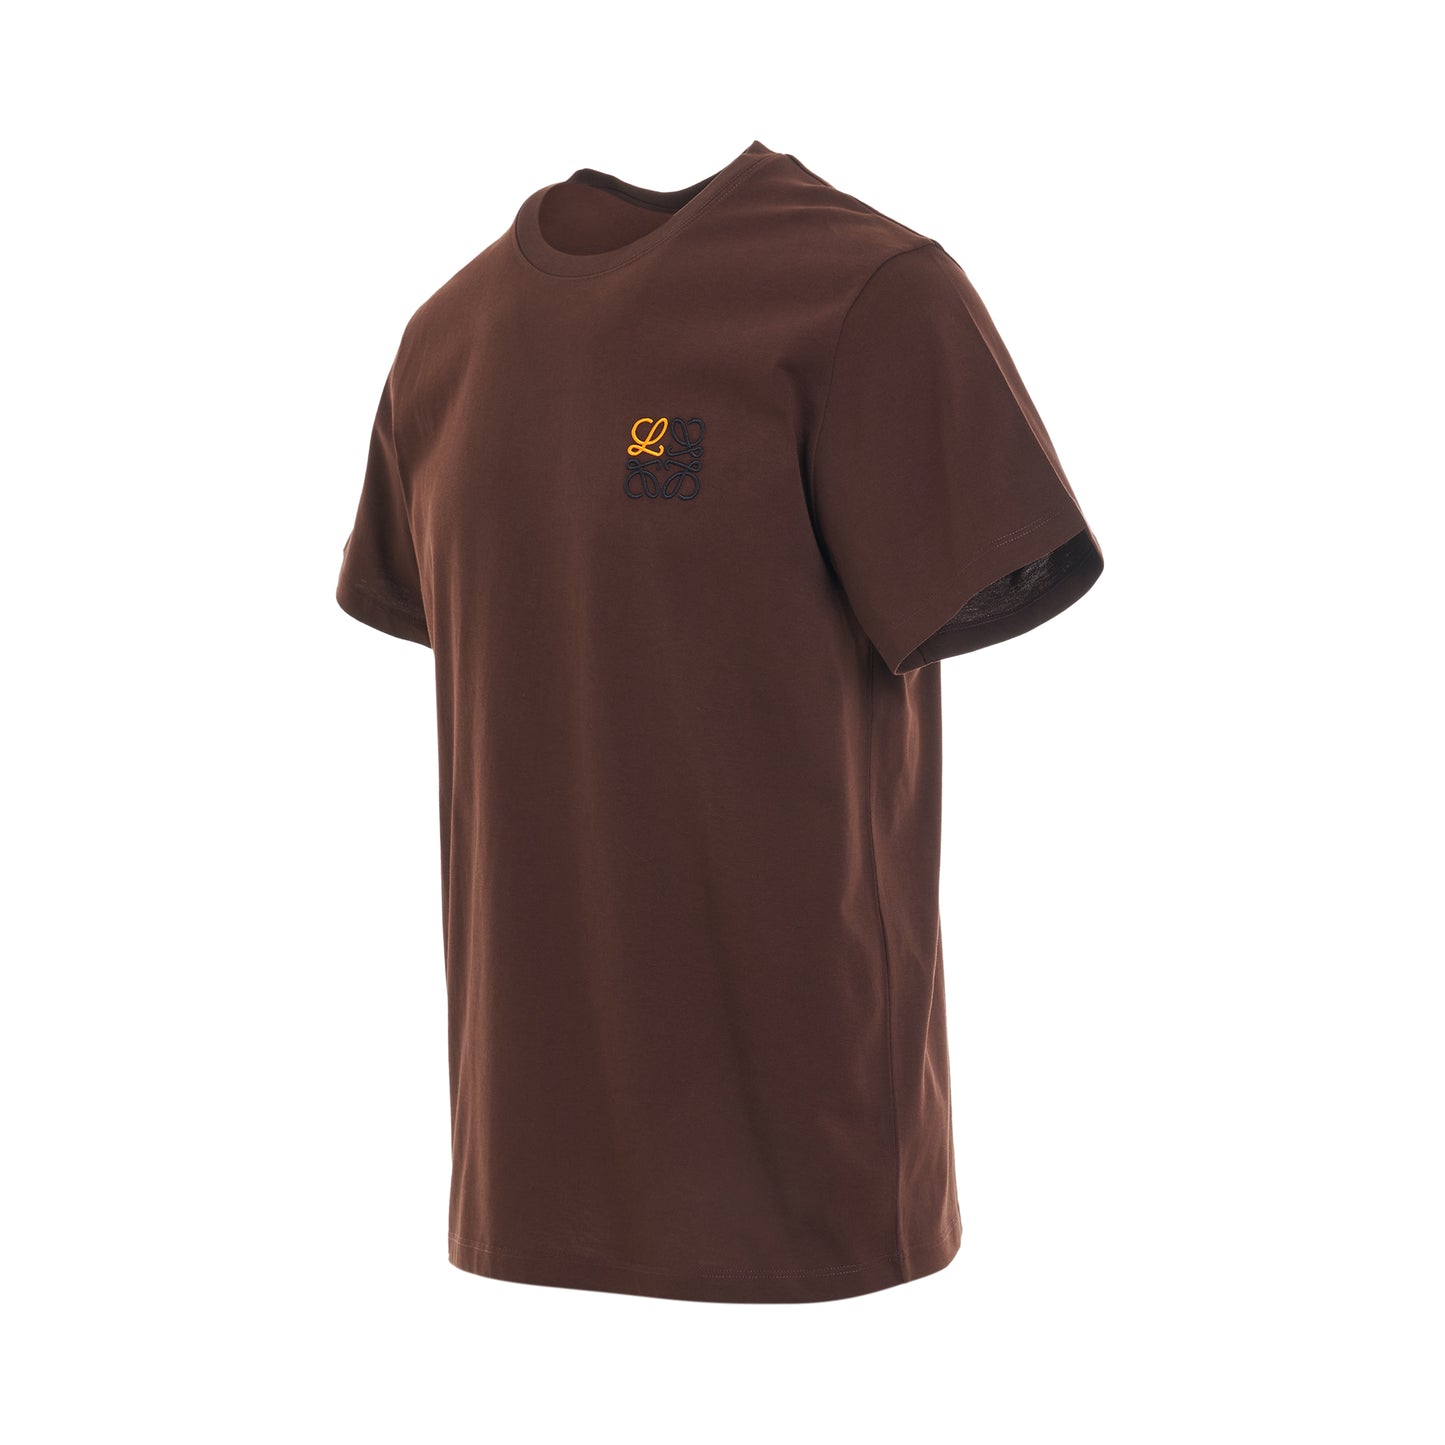 Anagram Logo T-Shirt in Chocolate Brown